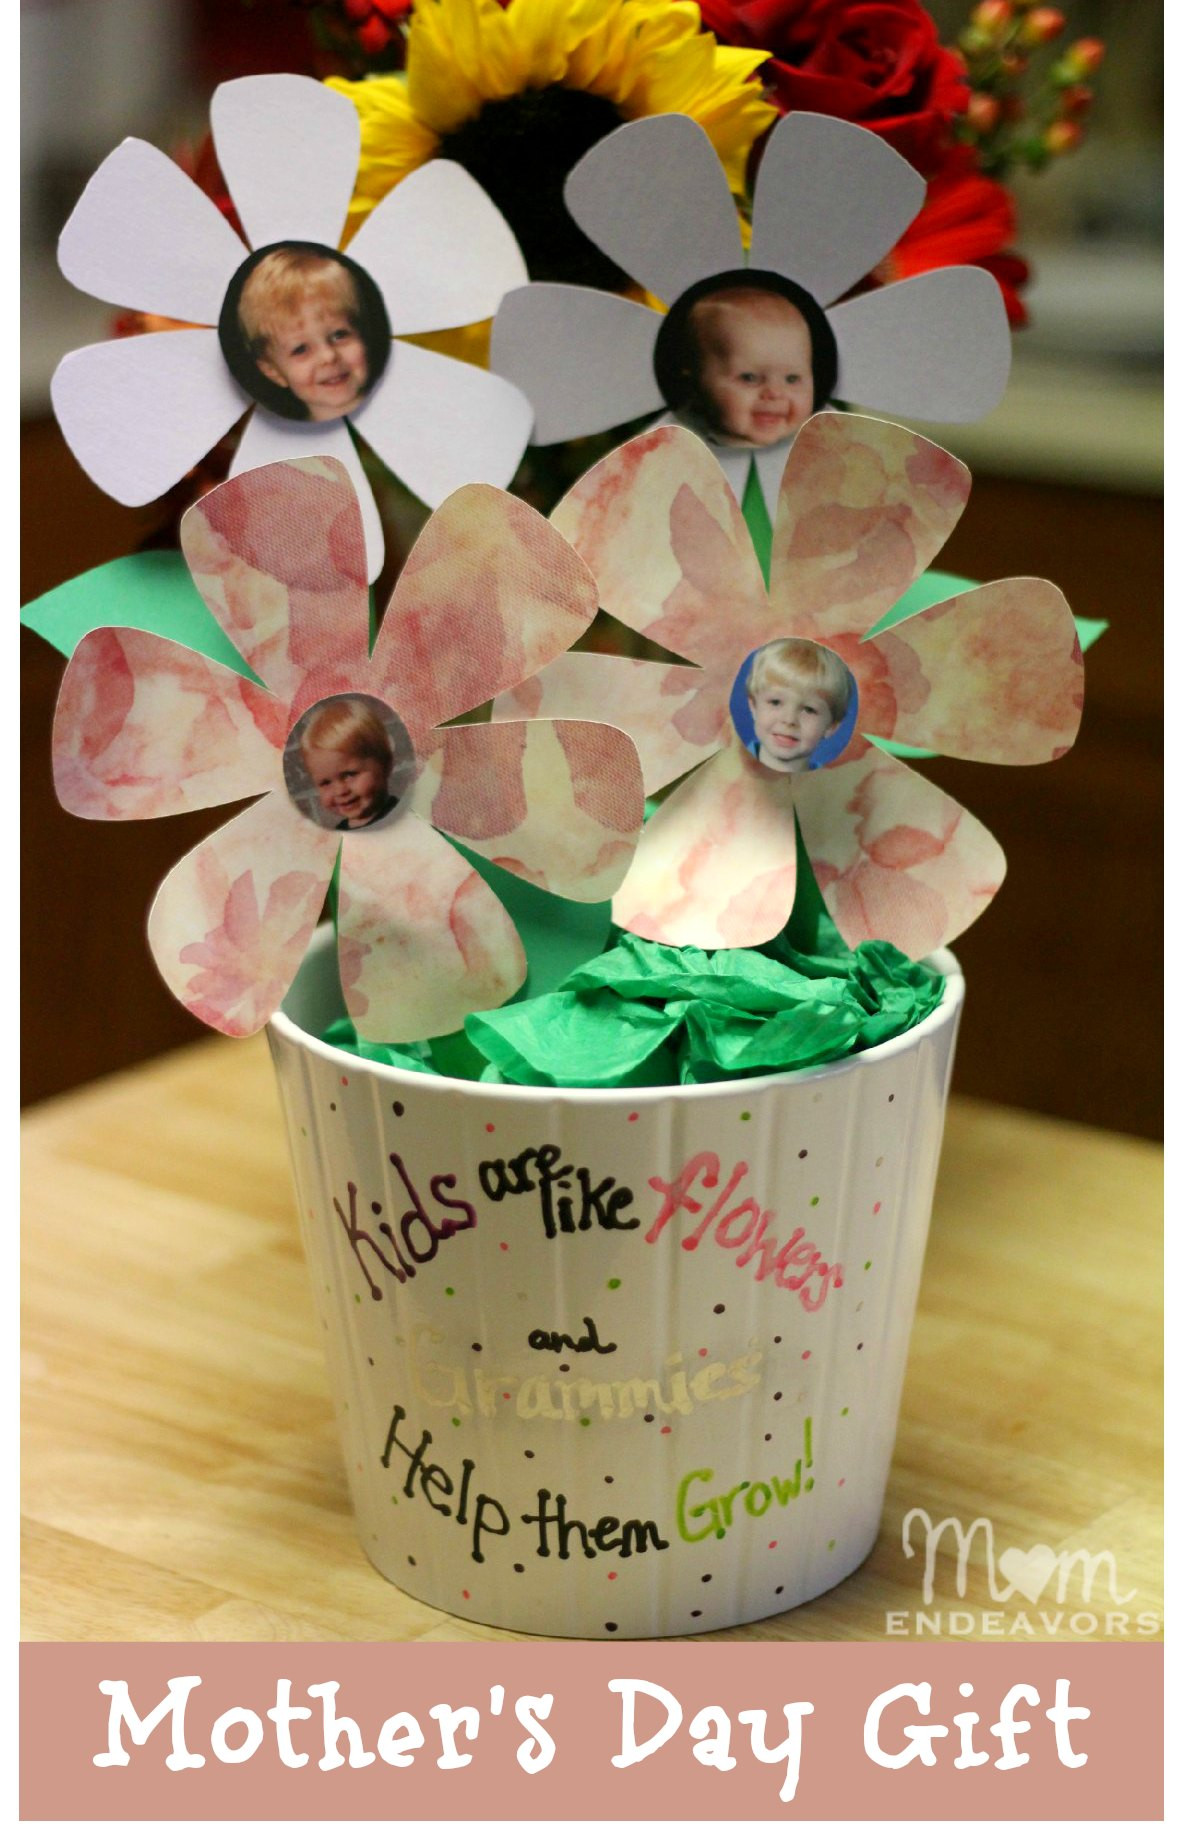 Mother Day Gift Ideas Handmade
 How to Choose a Meaningful Mother’s Day Gift